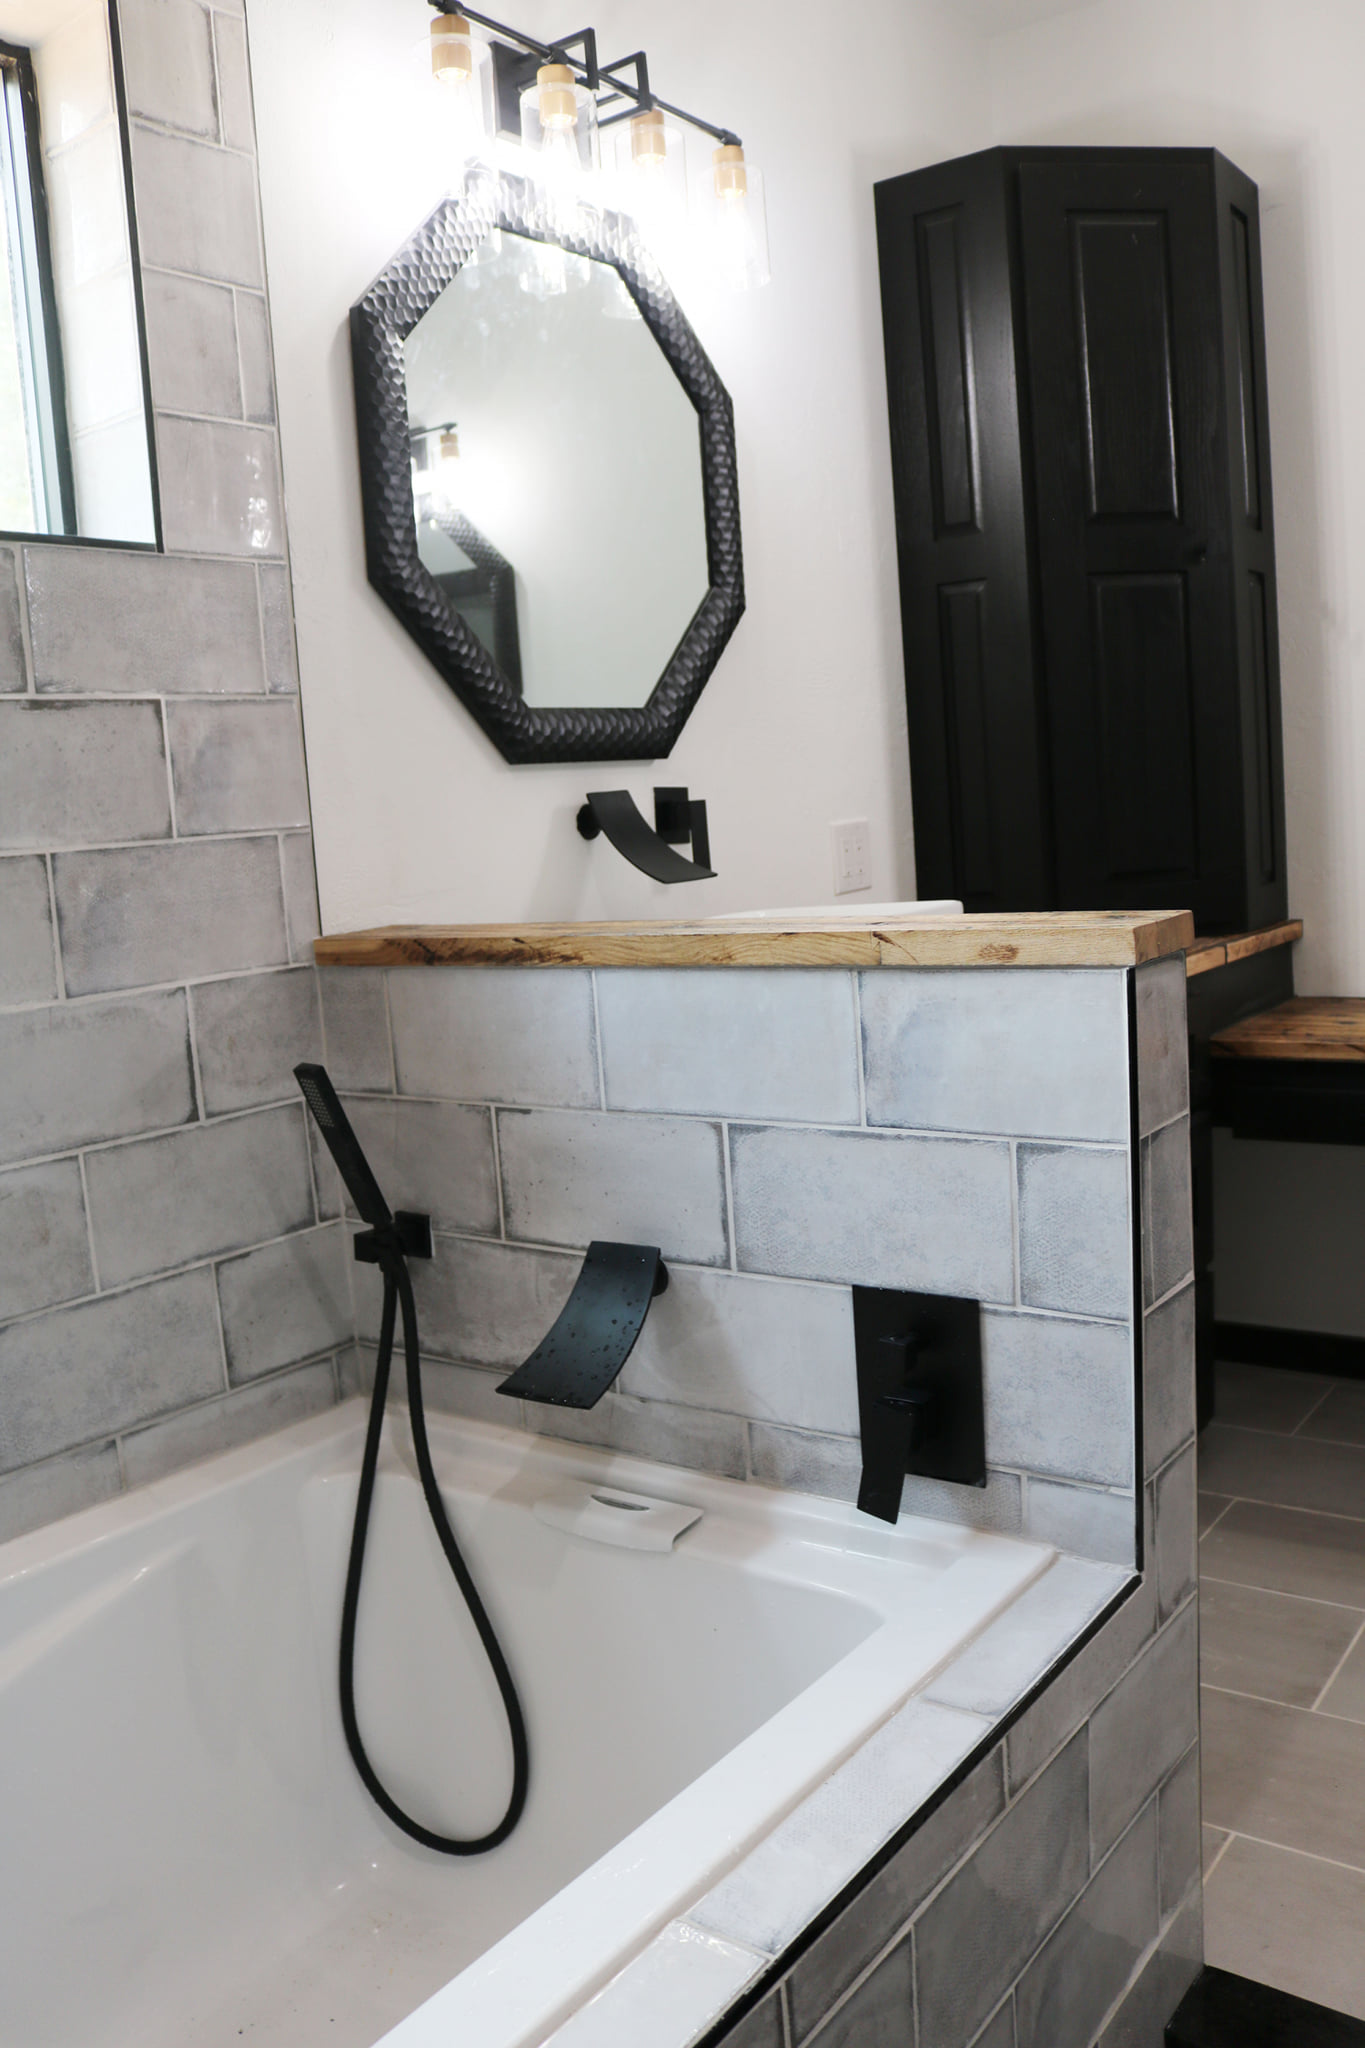 Image of a completed bathroom project.